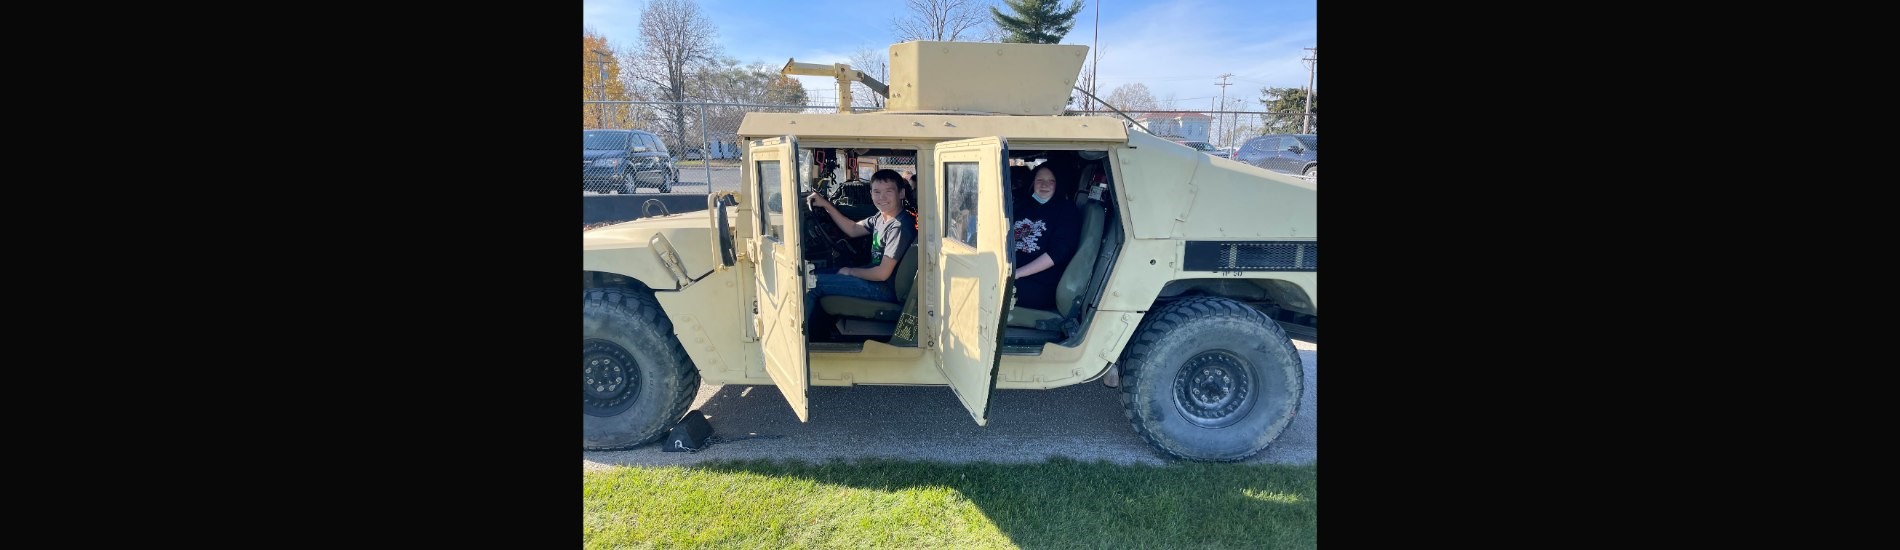 7th graders in the humvee loaned by the Arsenal